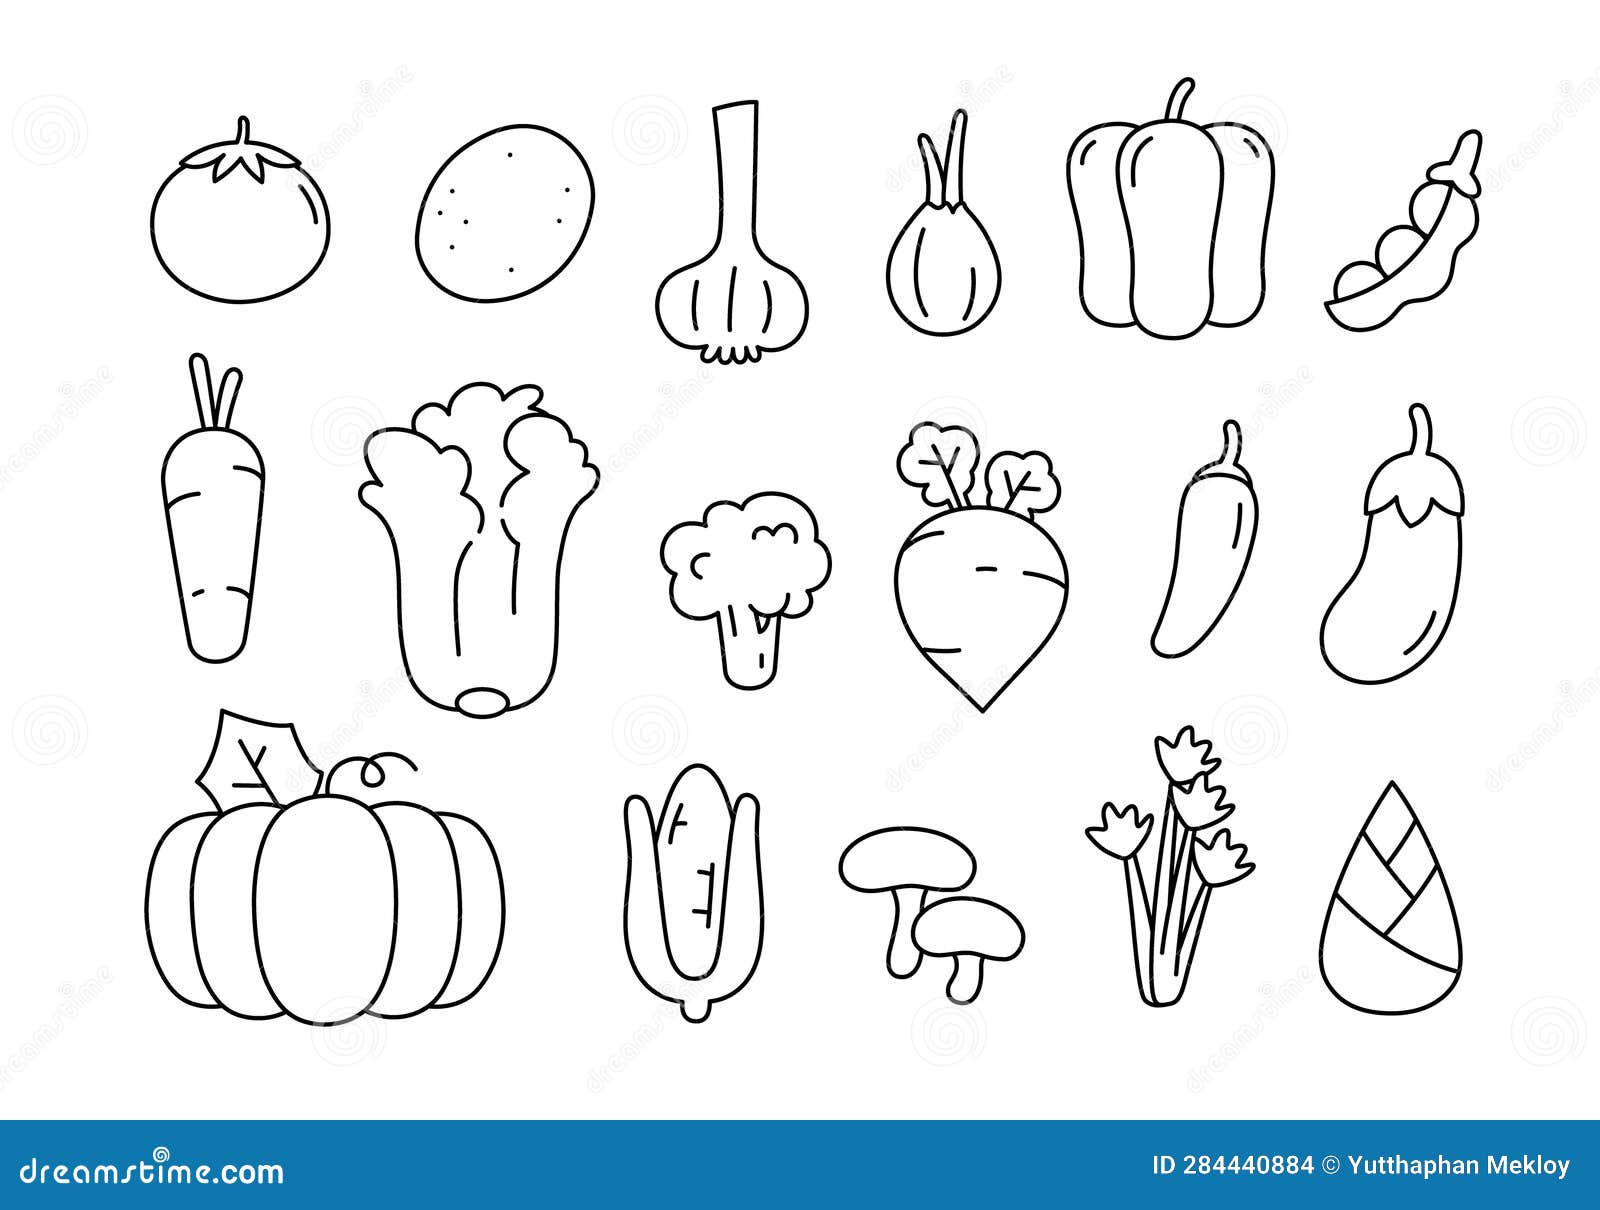 Cute Doodle Vegetable Cartoon Icons and Objects. Vegetable Line Icon ...